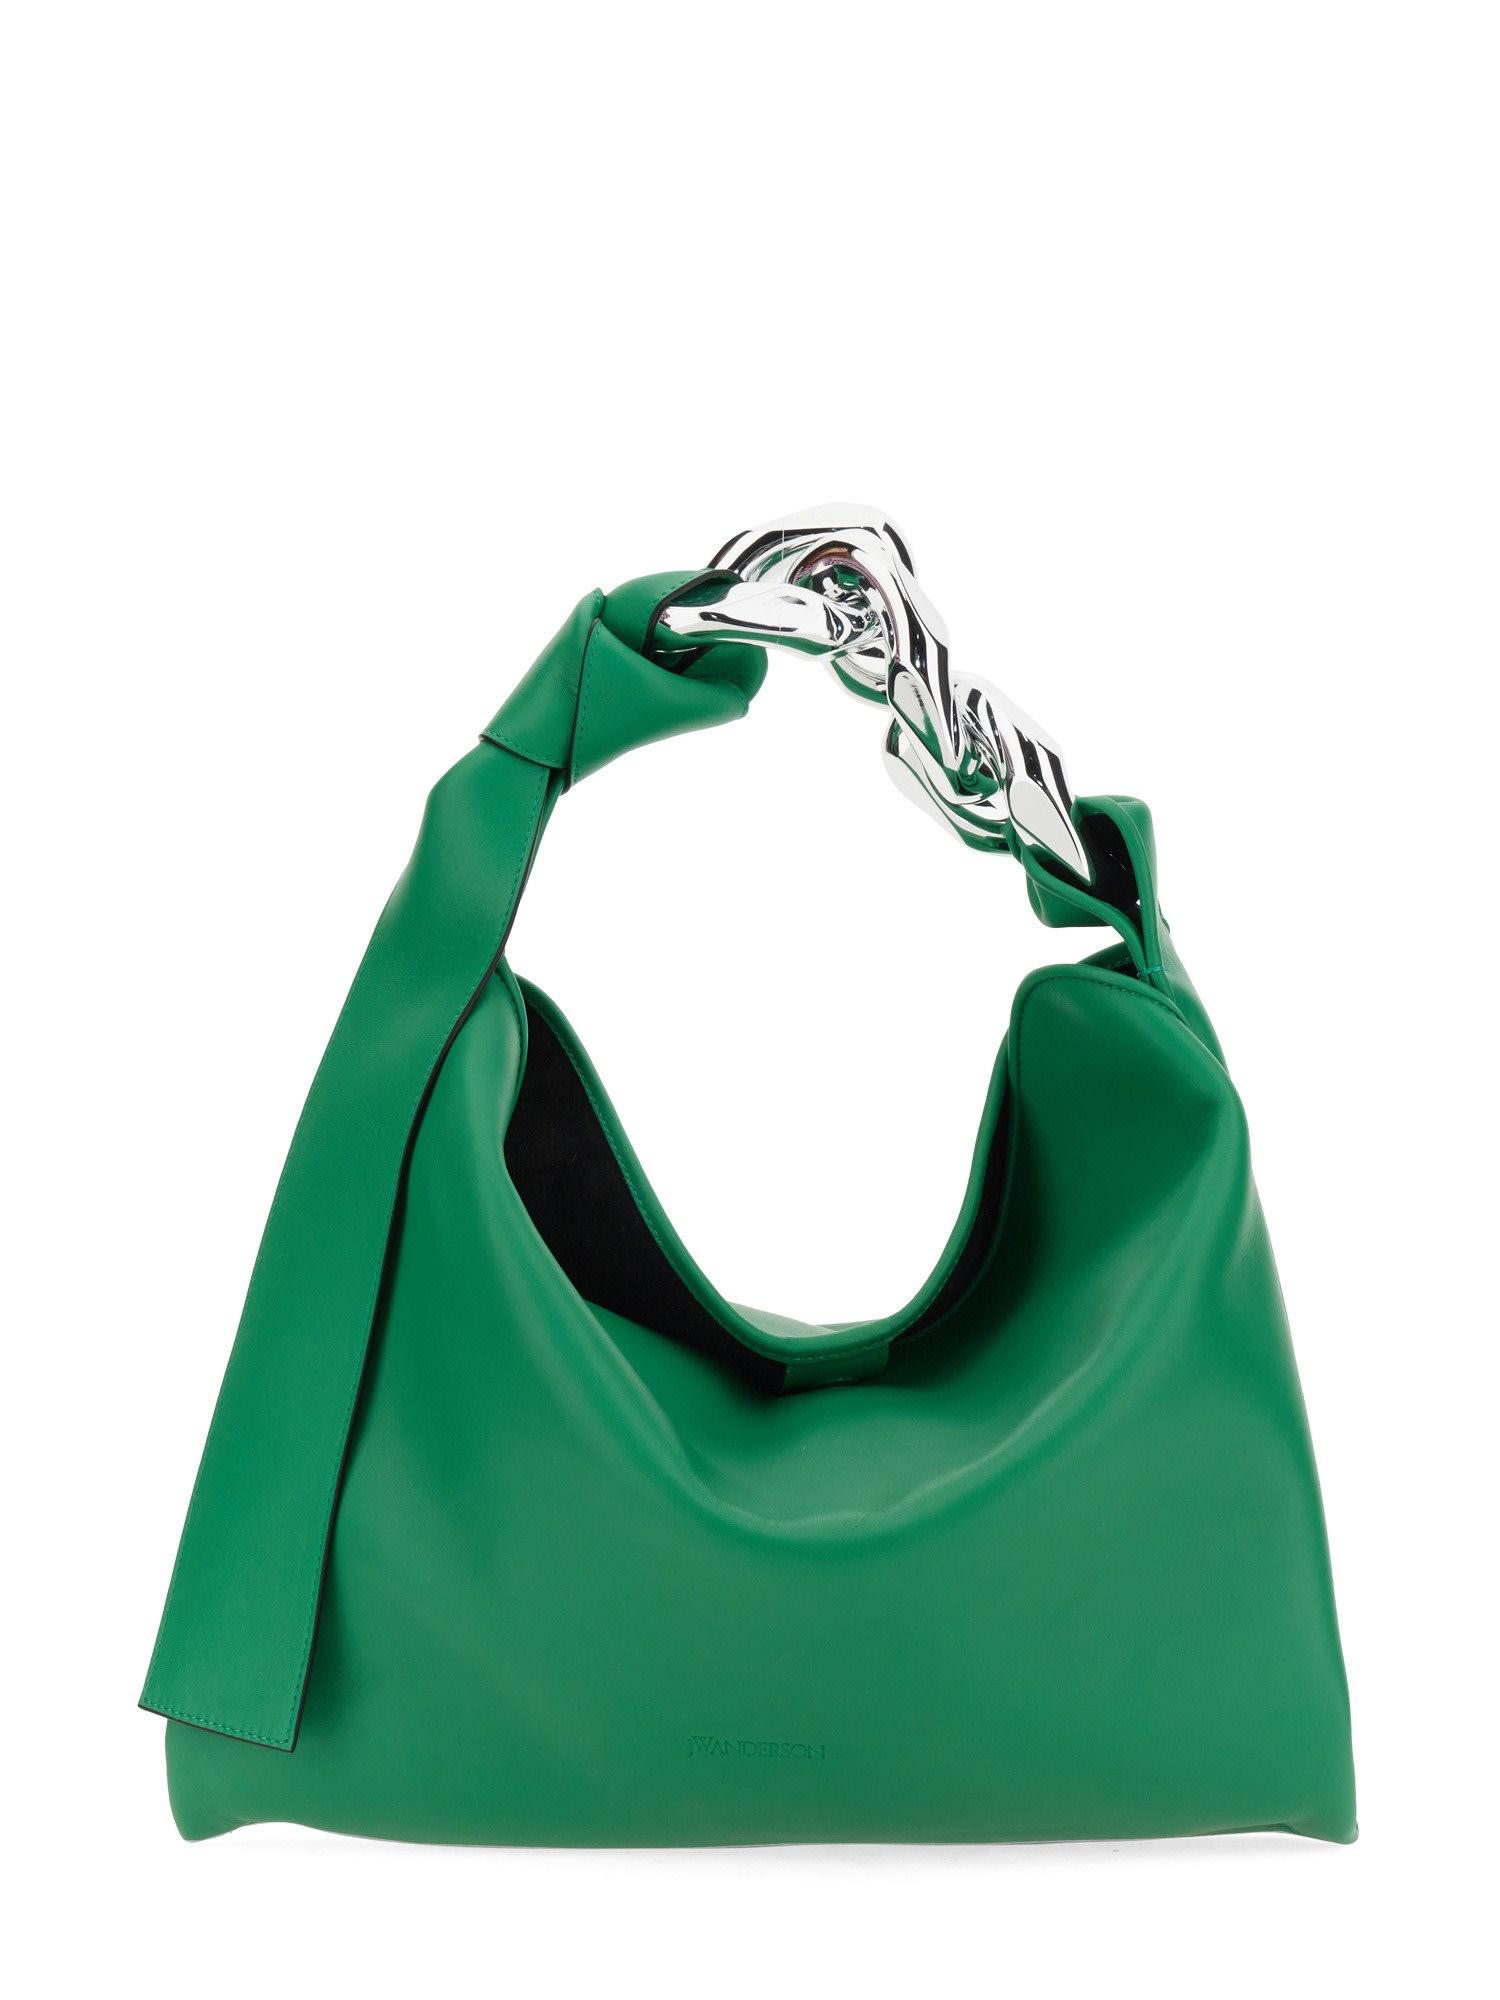 JW Anderson Suede Small Chain Hobo Bag in Green | Lyst